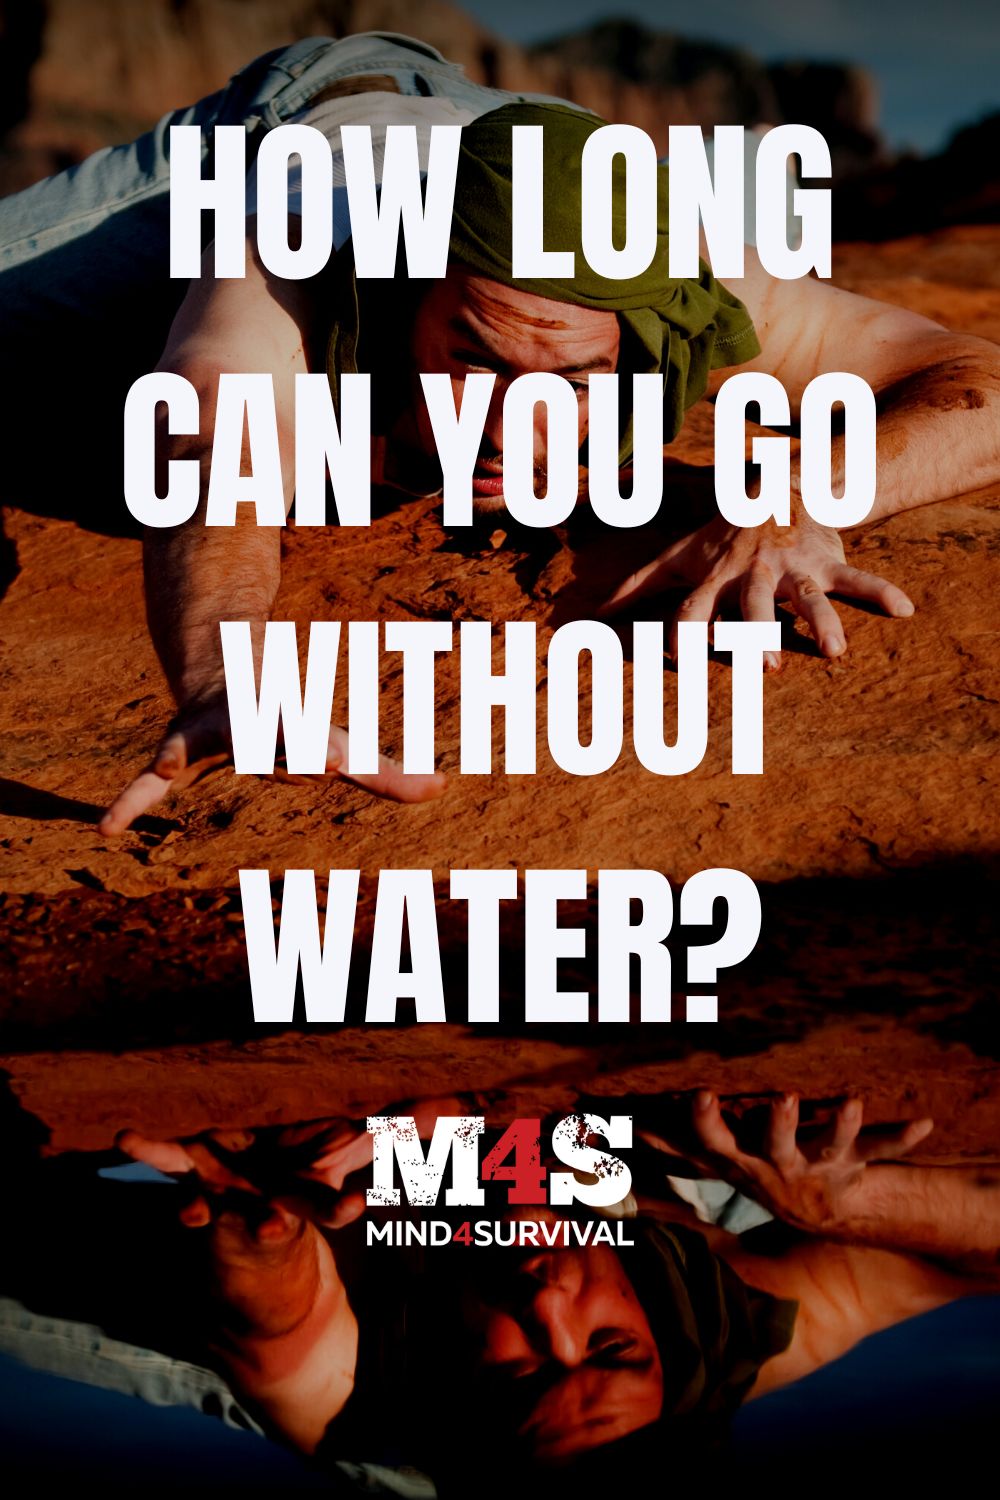 How Long Can You Go Without Water?